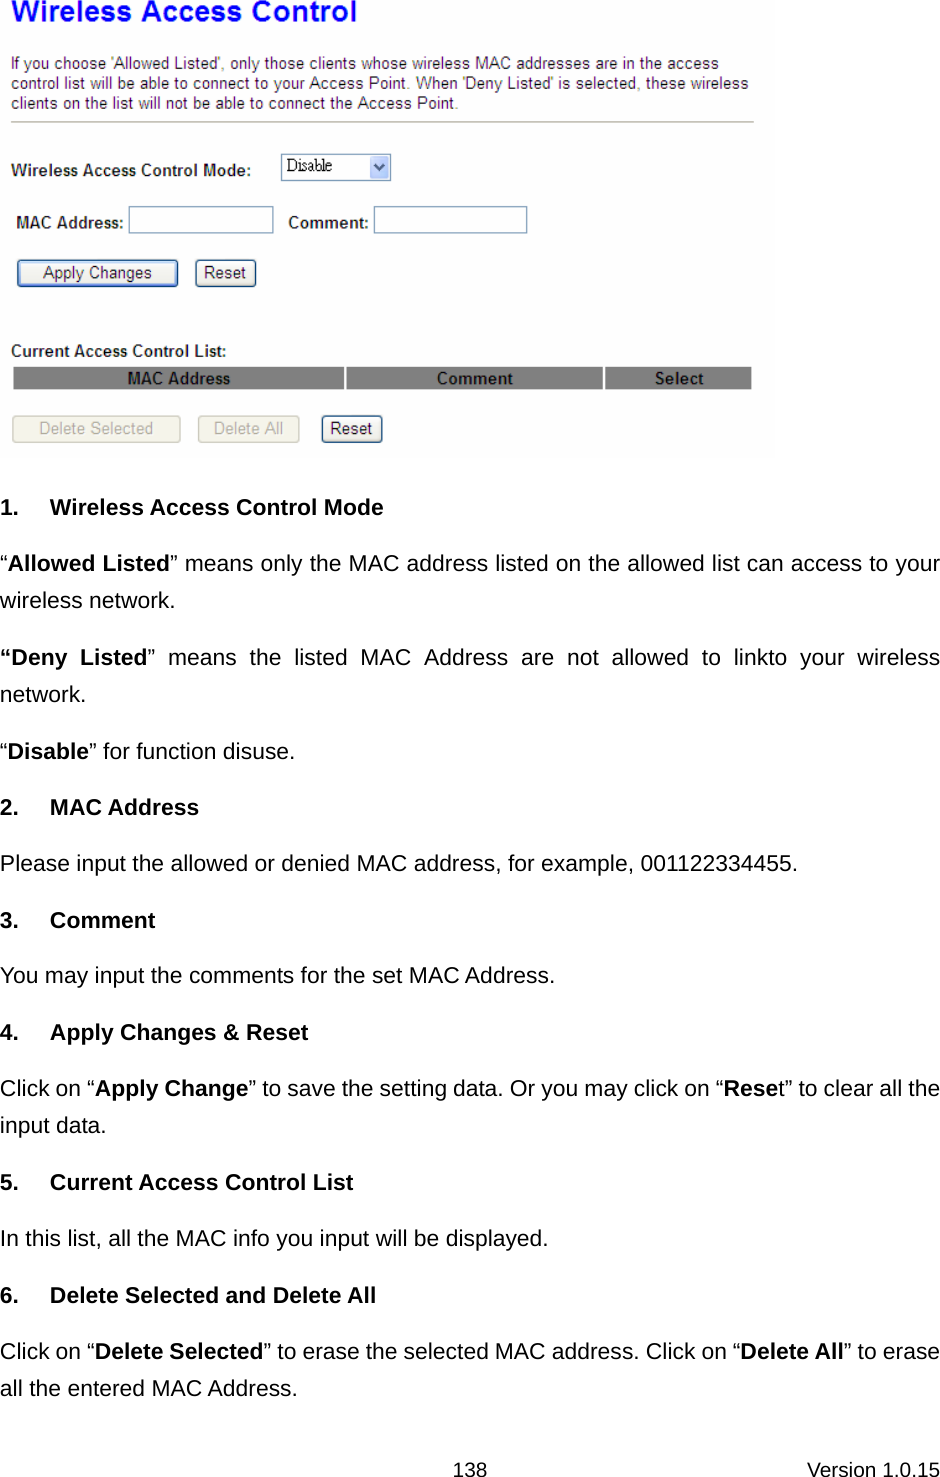 Version 1.0.15 138 1.  Wireless Access Control Mode “Allowed Listed” means only the MAC address listed on the allowed list can access to your wireless network.   “Deny Listed” means the listed MAC Address are not allowed to linkto your wireless network.  “Disable” for function disuse.   2. MAC Address Please input the allowed or denied MAC address, for example, 001122334455. 3. Comment You may input the comments for the set MAC Address.   4.  Apply Changes &amp; Reset Click on “Apply Change” to save the setting data. Or you may click on “Reset” to clear all the input data. 5.  Current Access Control List In this list, all the MAC info you input will be displayed.   6.  Delete Selected and Delete All Click on “Delete Selected” to erase the selected MAC address. Click on “Delete All” to erase all the entered MAC Address.   